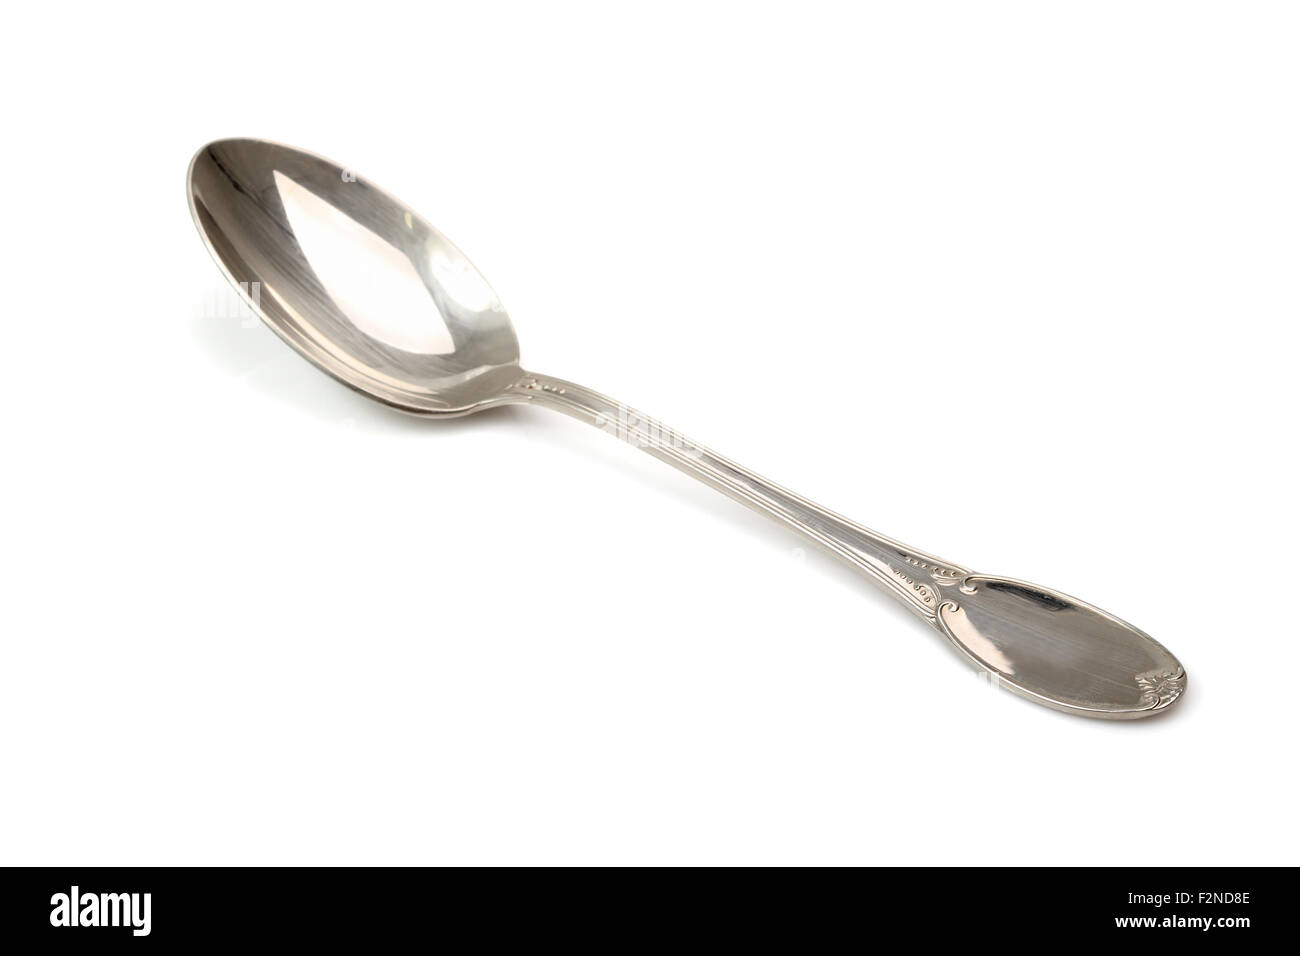 Silver spoon. Isolated with clipping path. Stock Photo